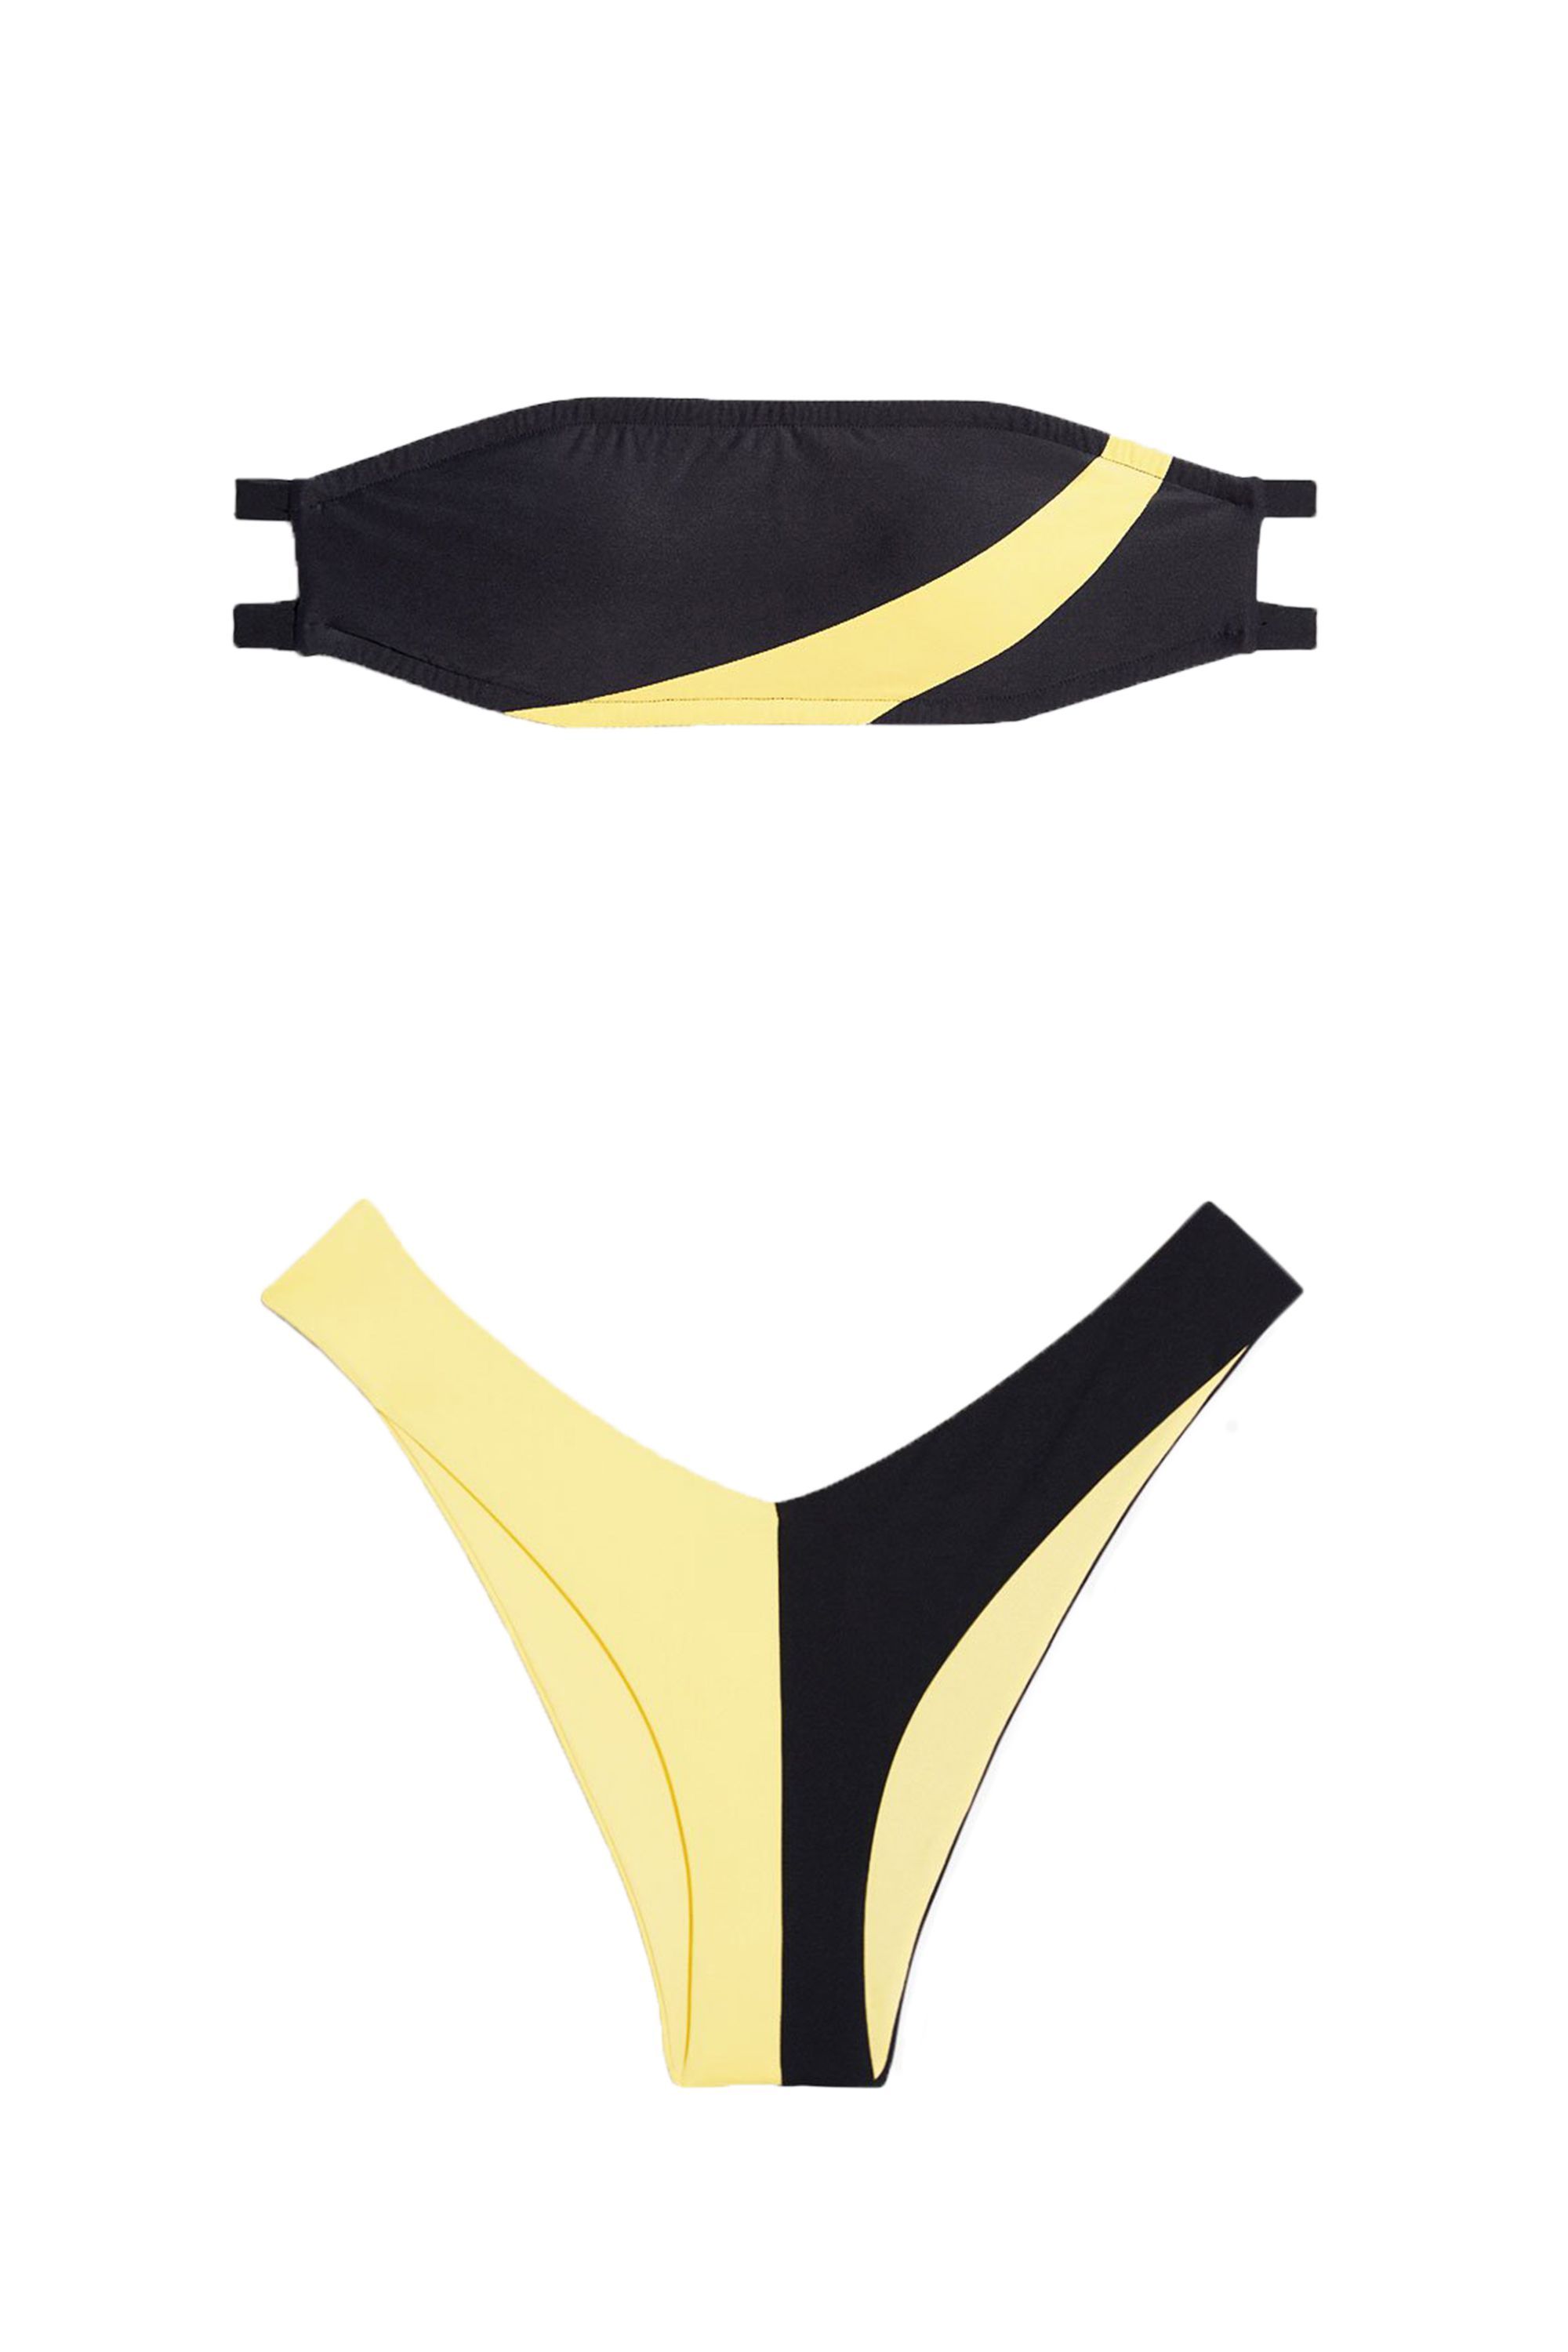 g clip swimsuits